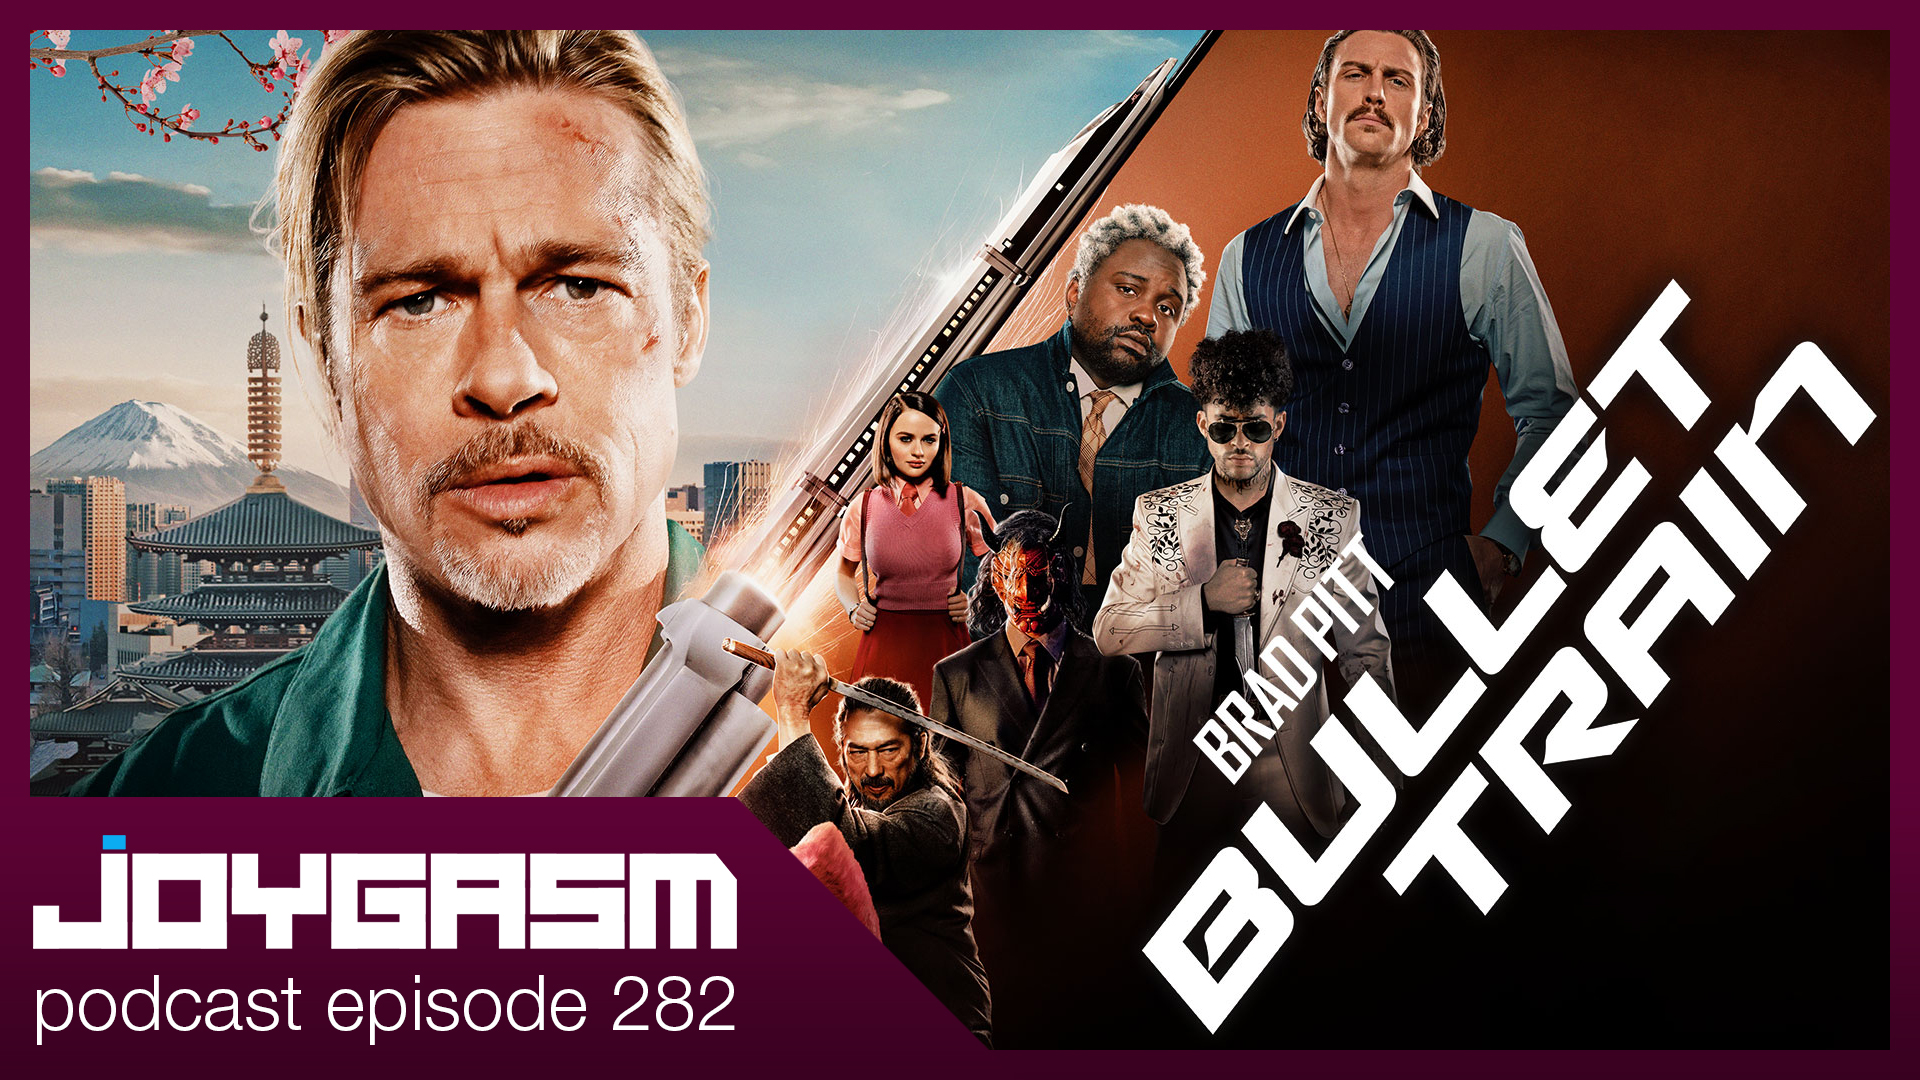 Ep. 282: Bullet Train Movie Review